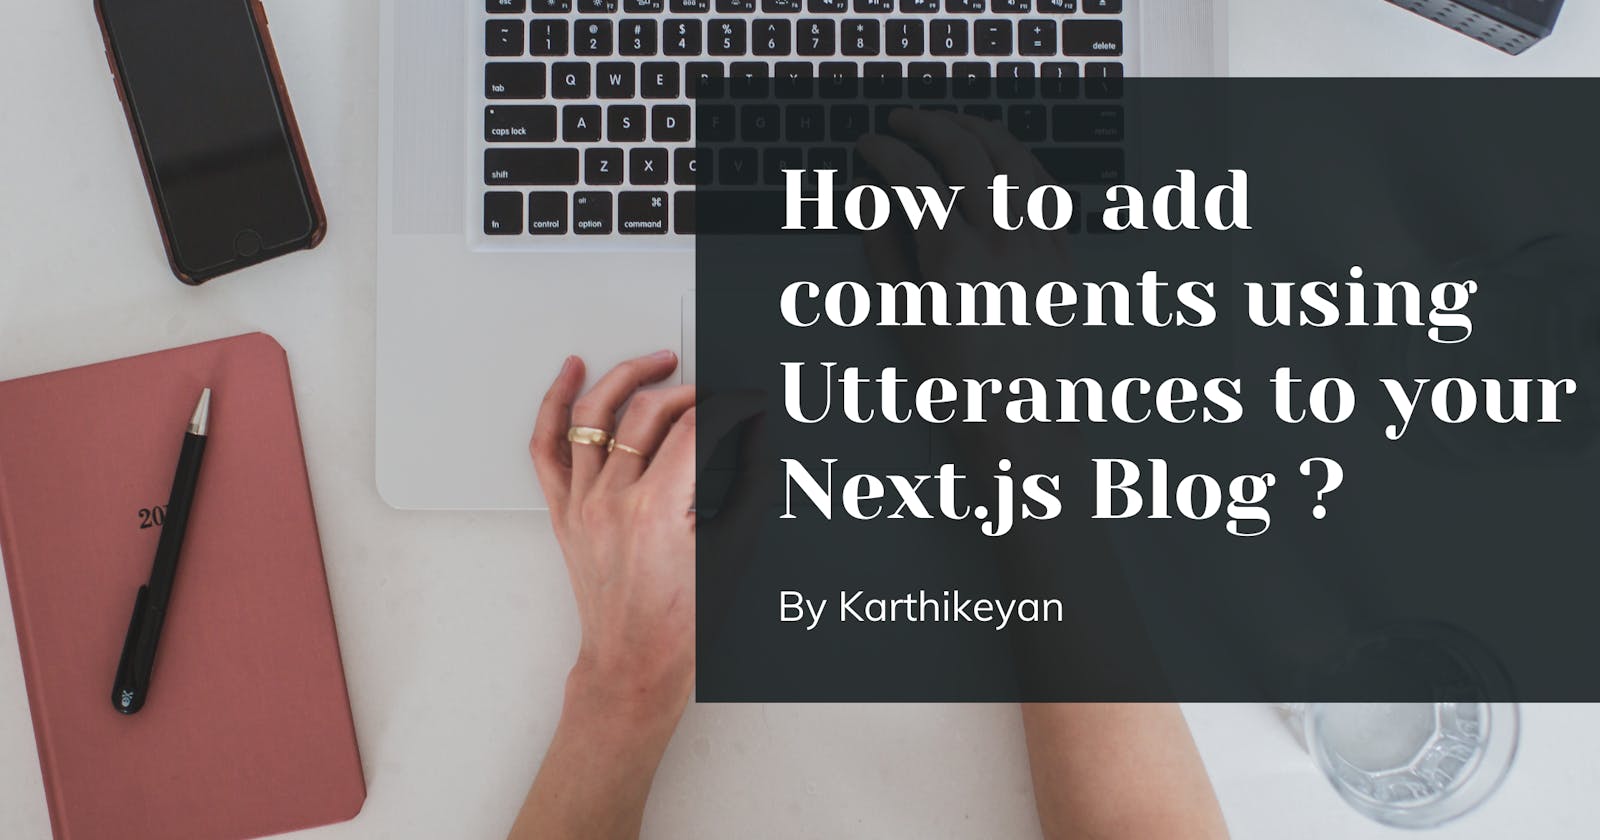 How to add comments using Utterances to your Next.js Blog ?